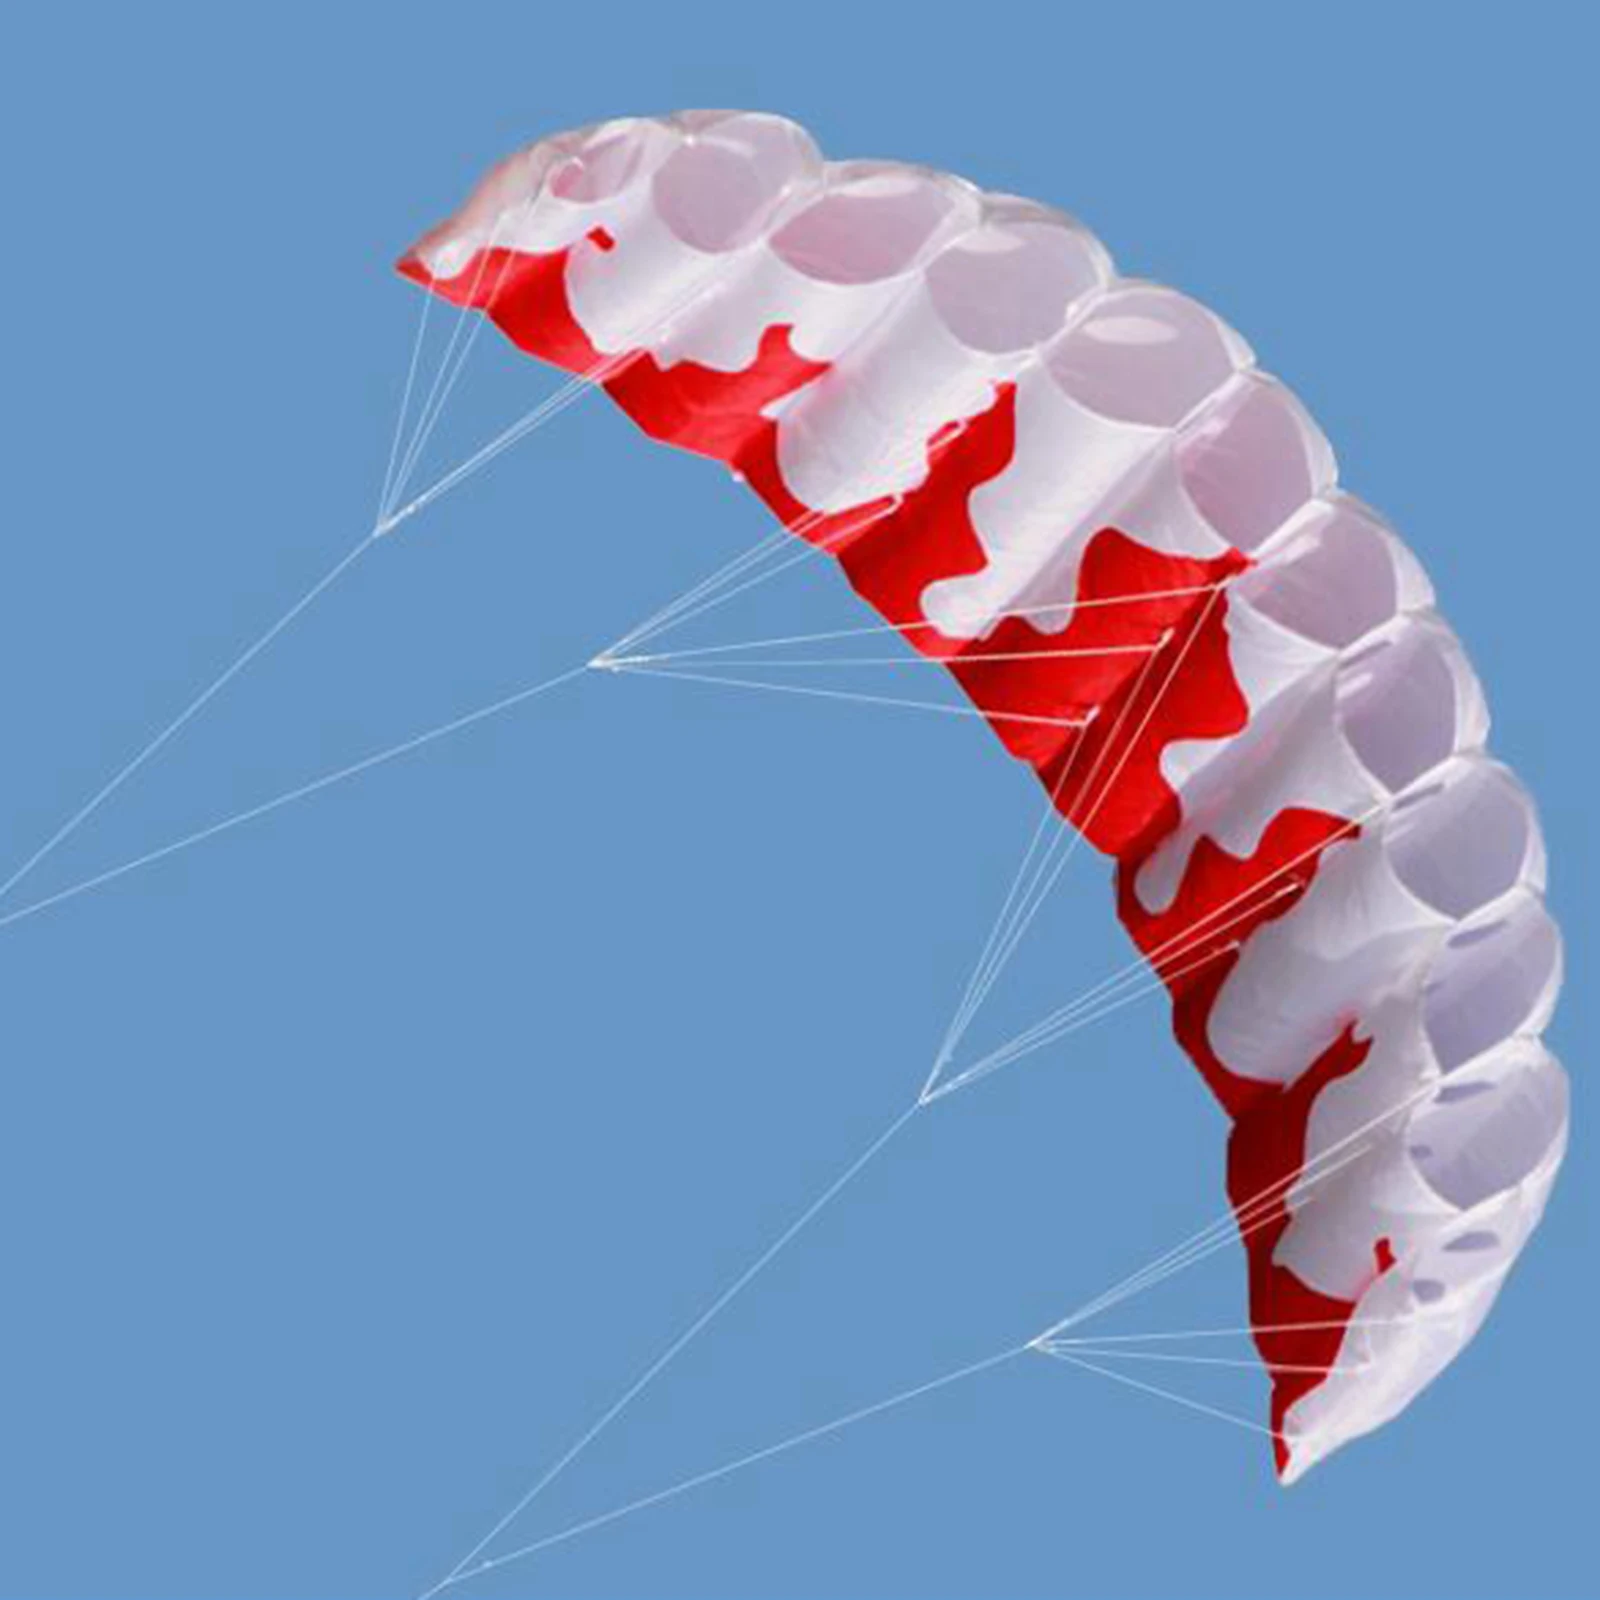 Portable Stunt Power Kite Durable Beach Parafoil Parachute Flying Wing Toy